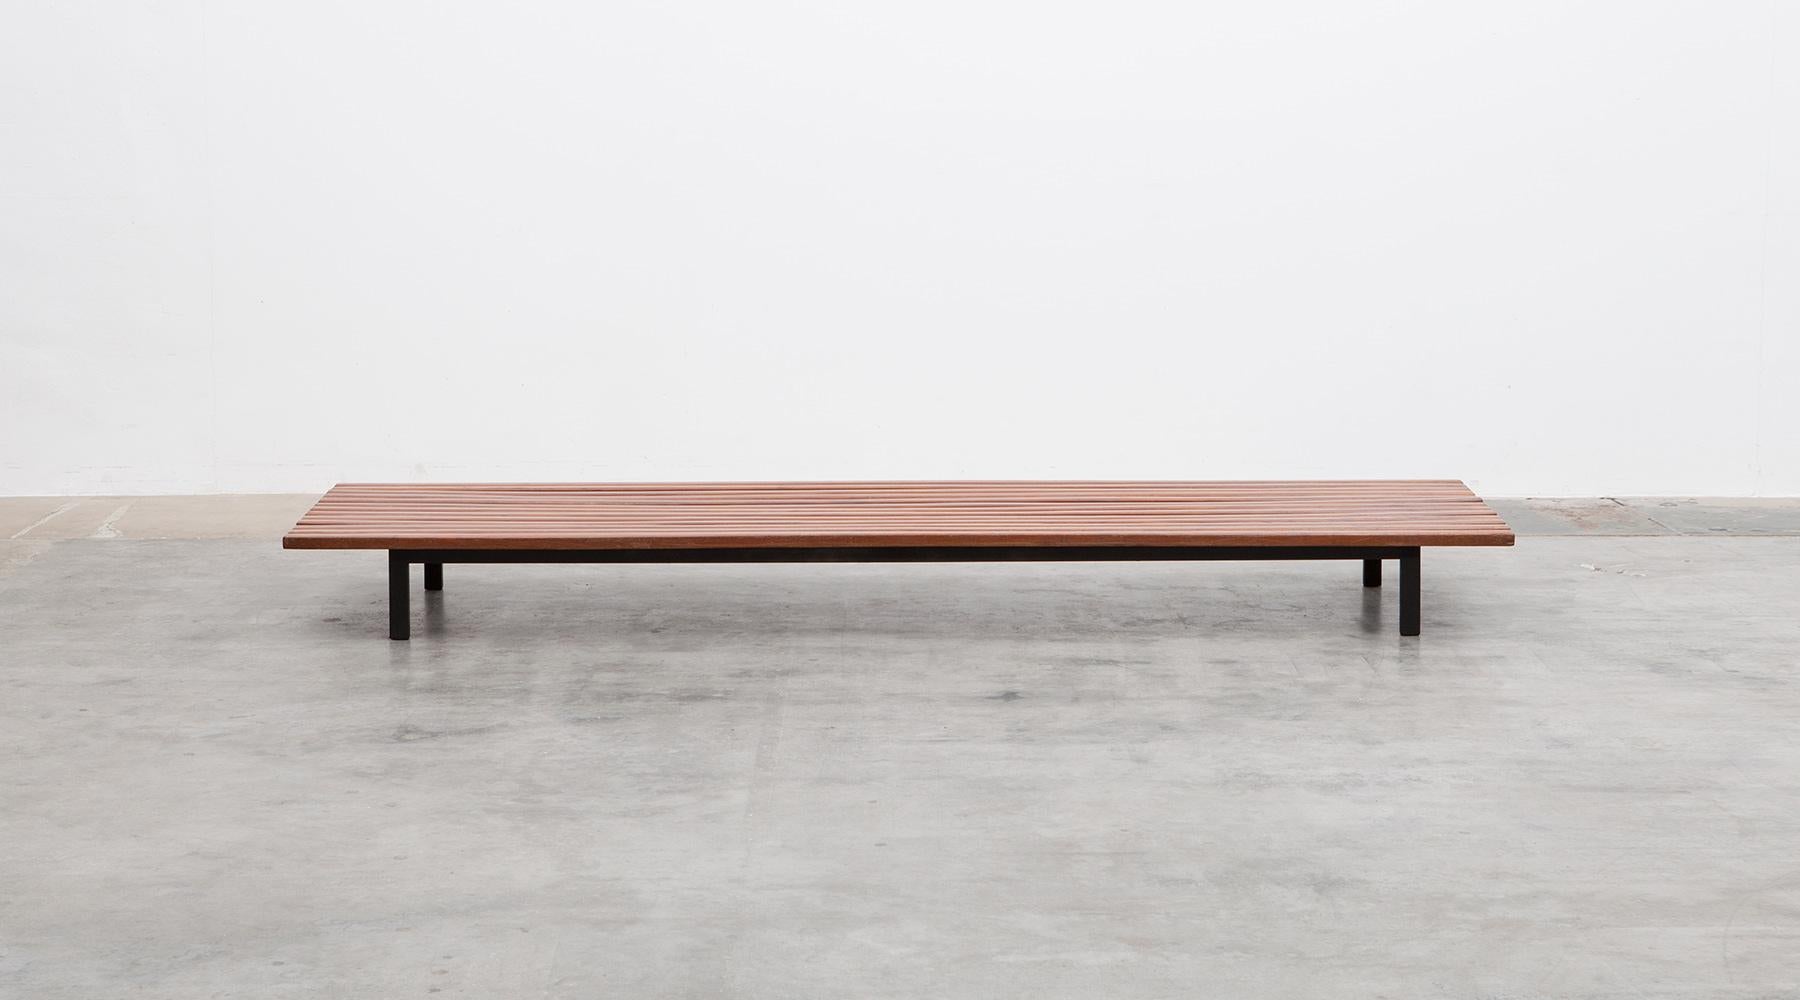 Simple yet originally inventive Perriand bench. Sold and distributed in the 1950s by famous Paris gallery Steph Simon, together with pieces by her frequent collaborator Jean Prouvé.

Charlotte Perriand is one of the most influential French designers